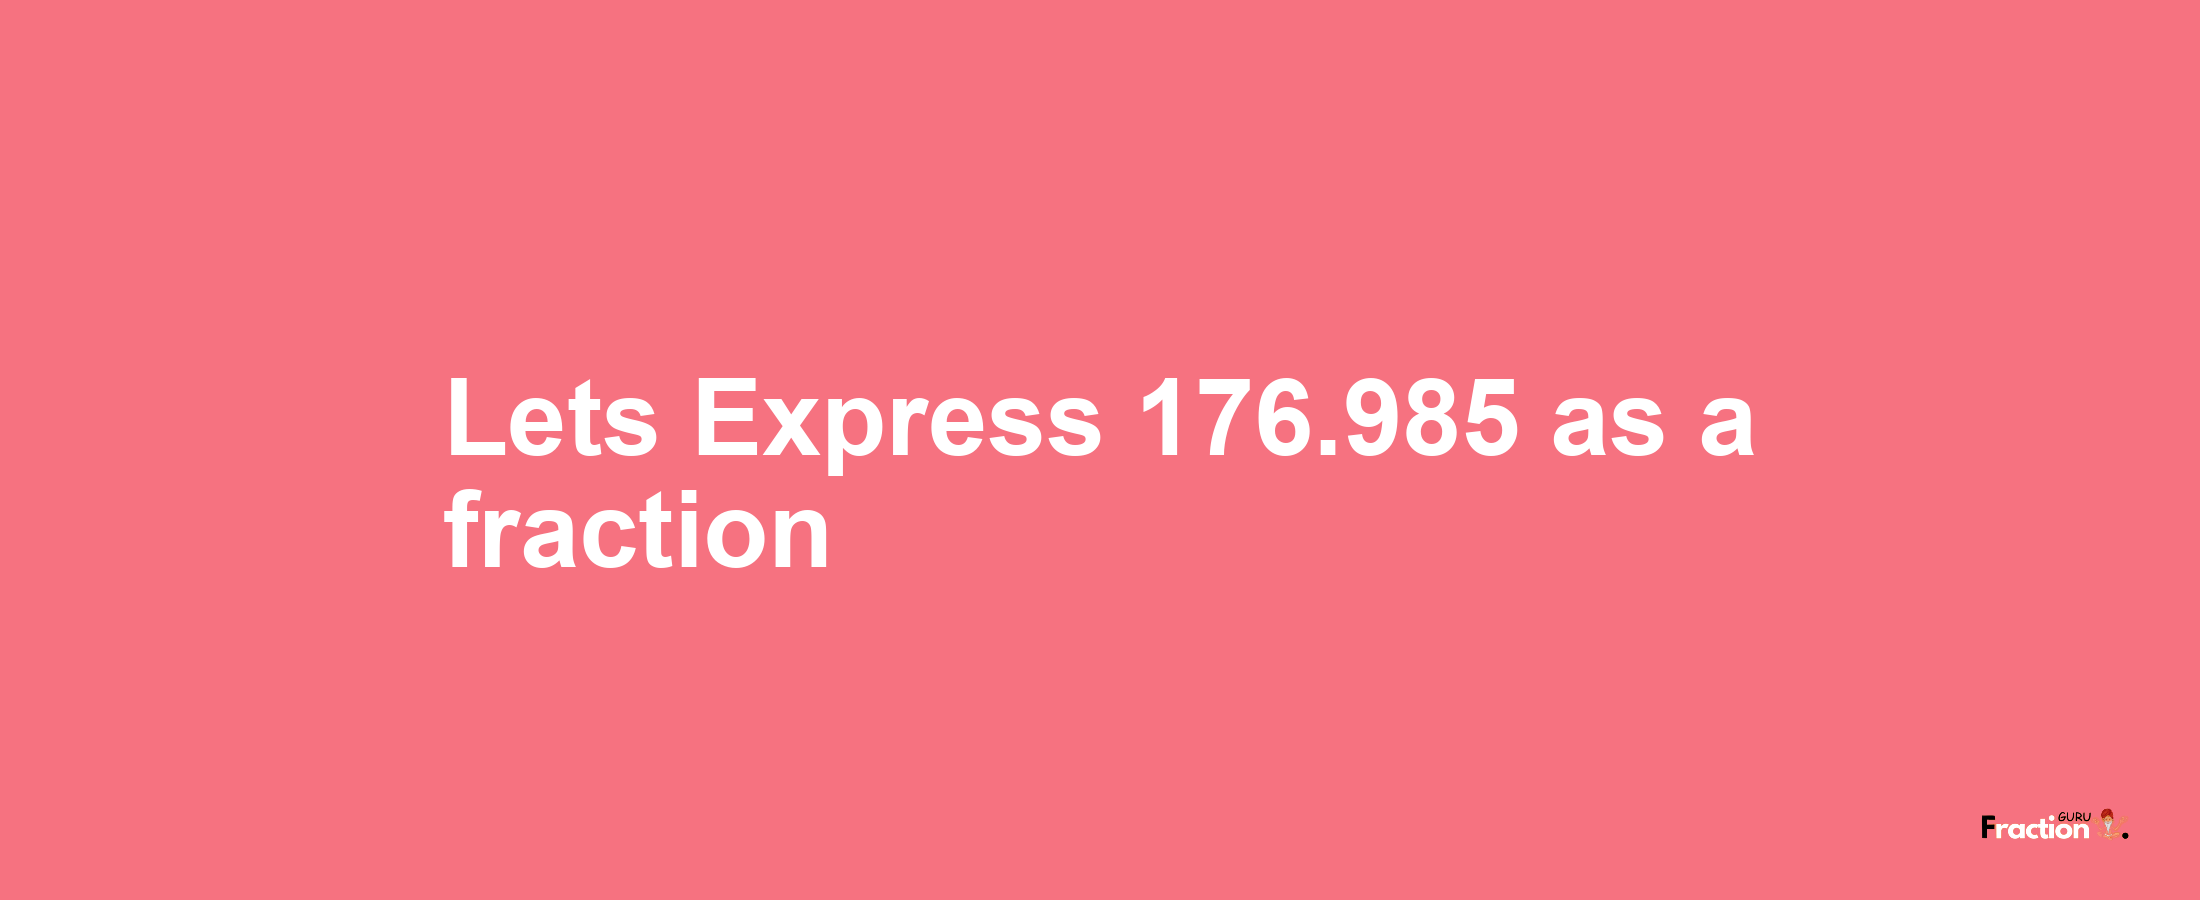 Lets Express 176.985 as afraction